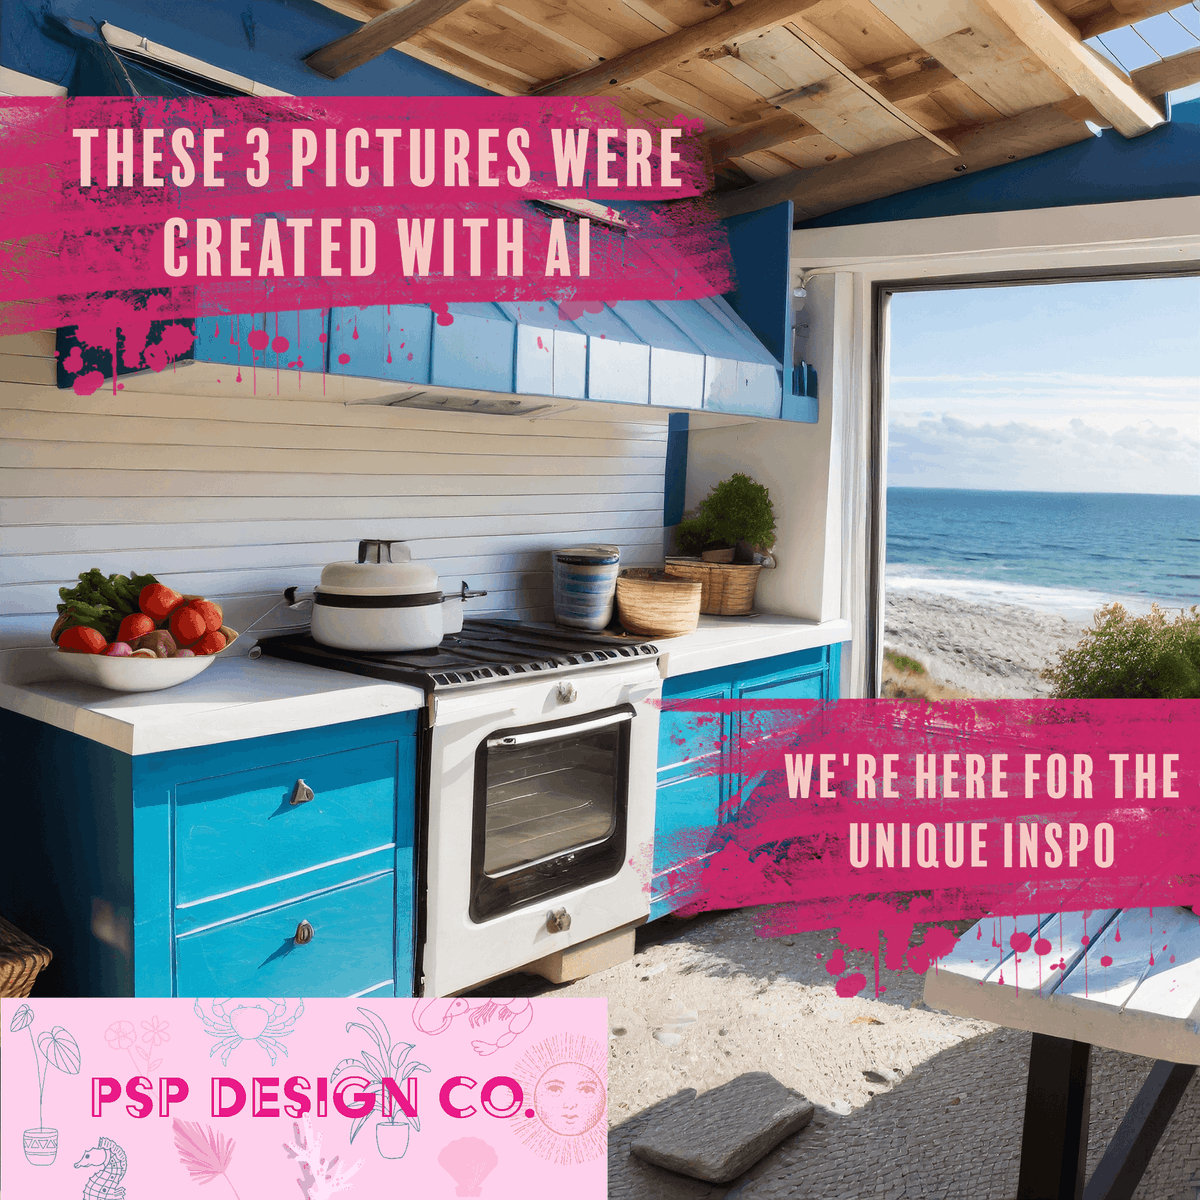 these coastal feels are absolutely what we dream about - I love the colors

#interiors #kitchens #coastaldesign #interoiorinspo #AIimages